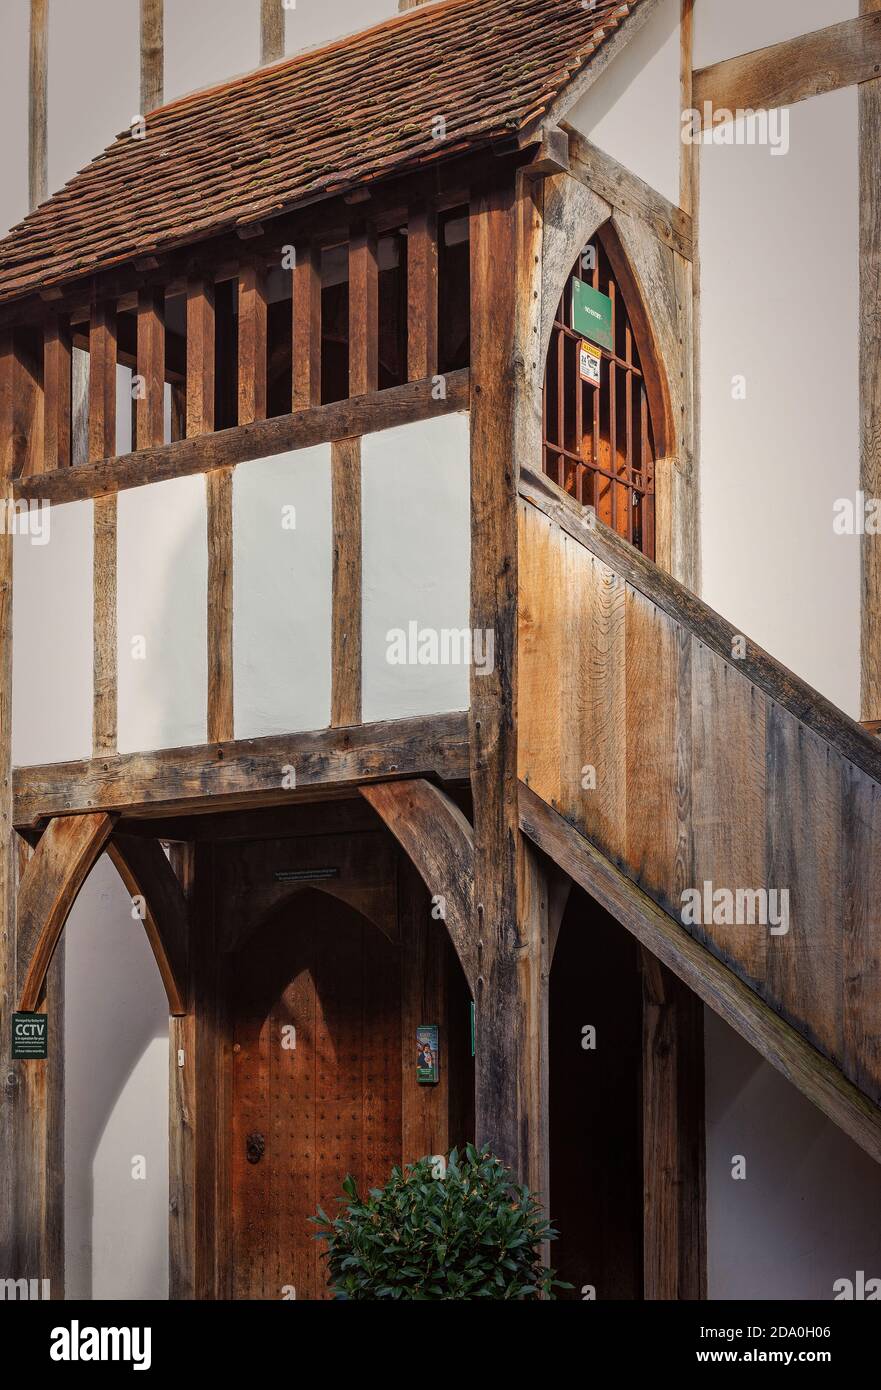 An historic half-timbered building. A door sits under a gallery and a stairway runs up the side to an iron gate. Stock Photo